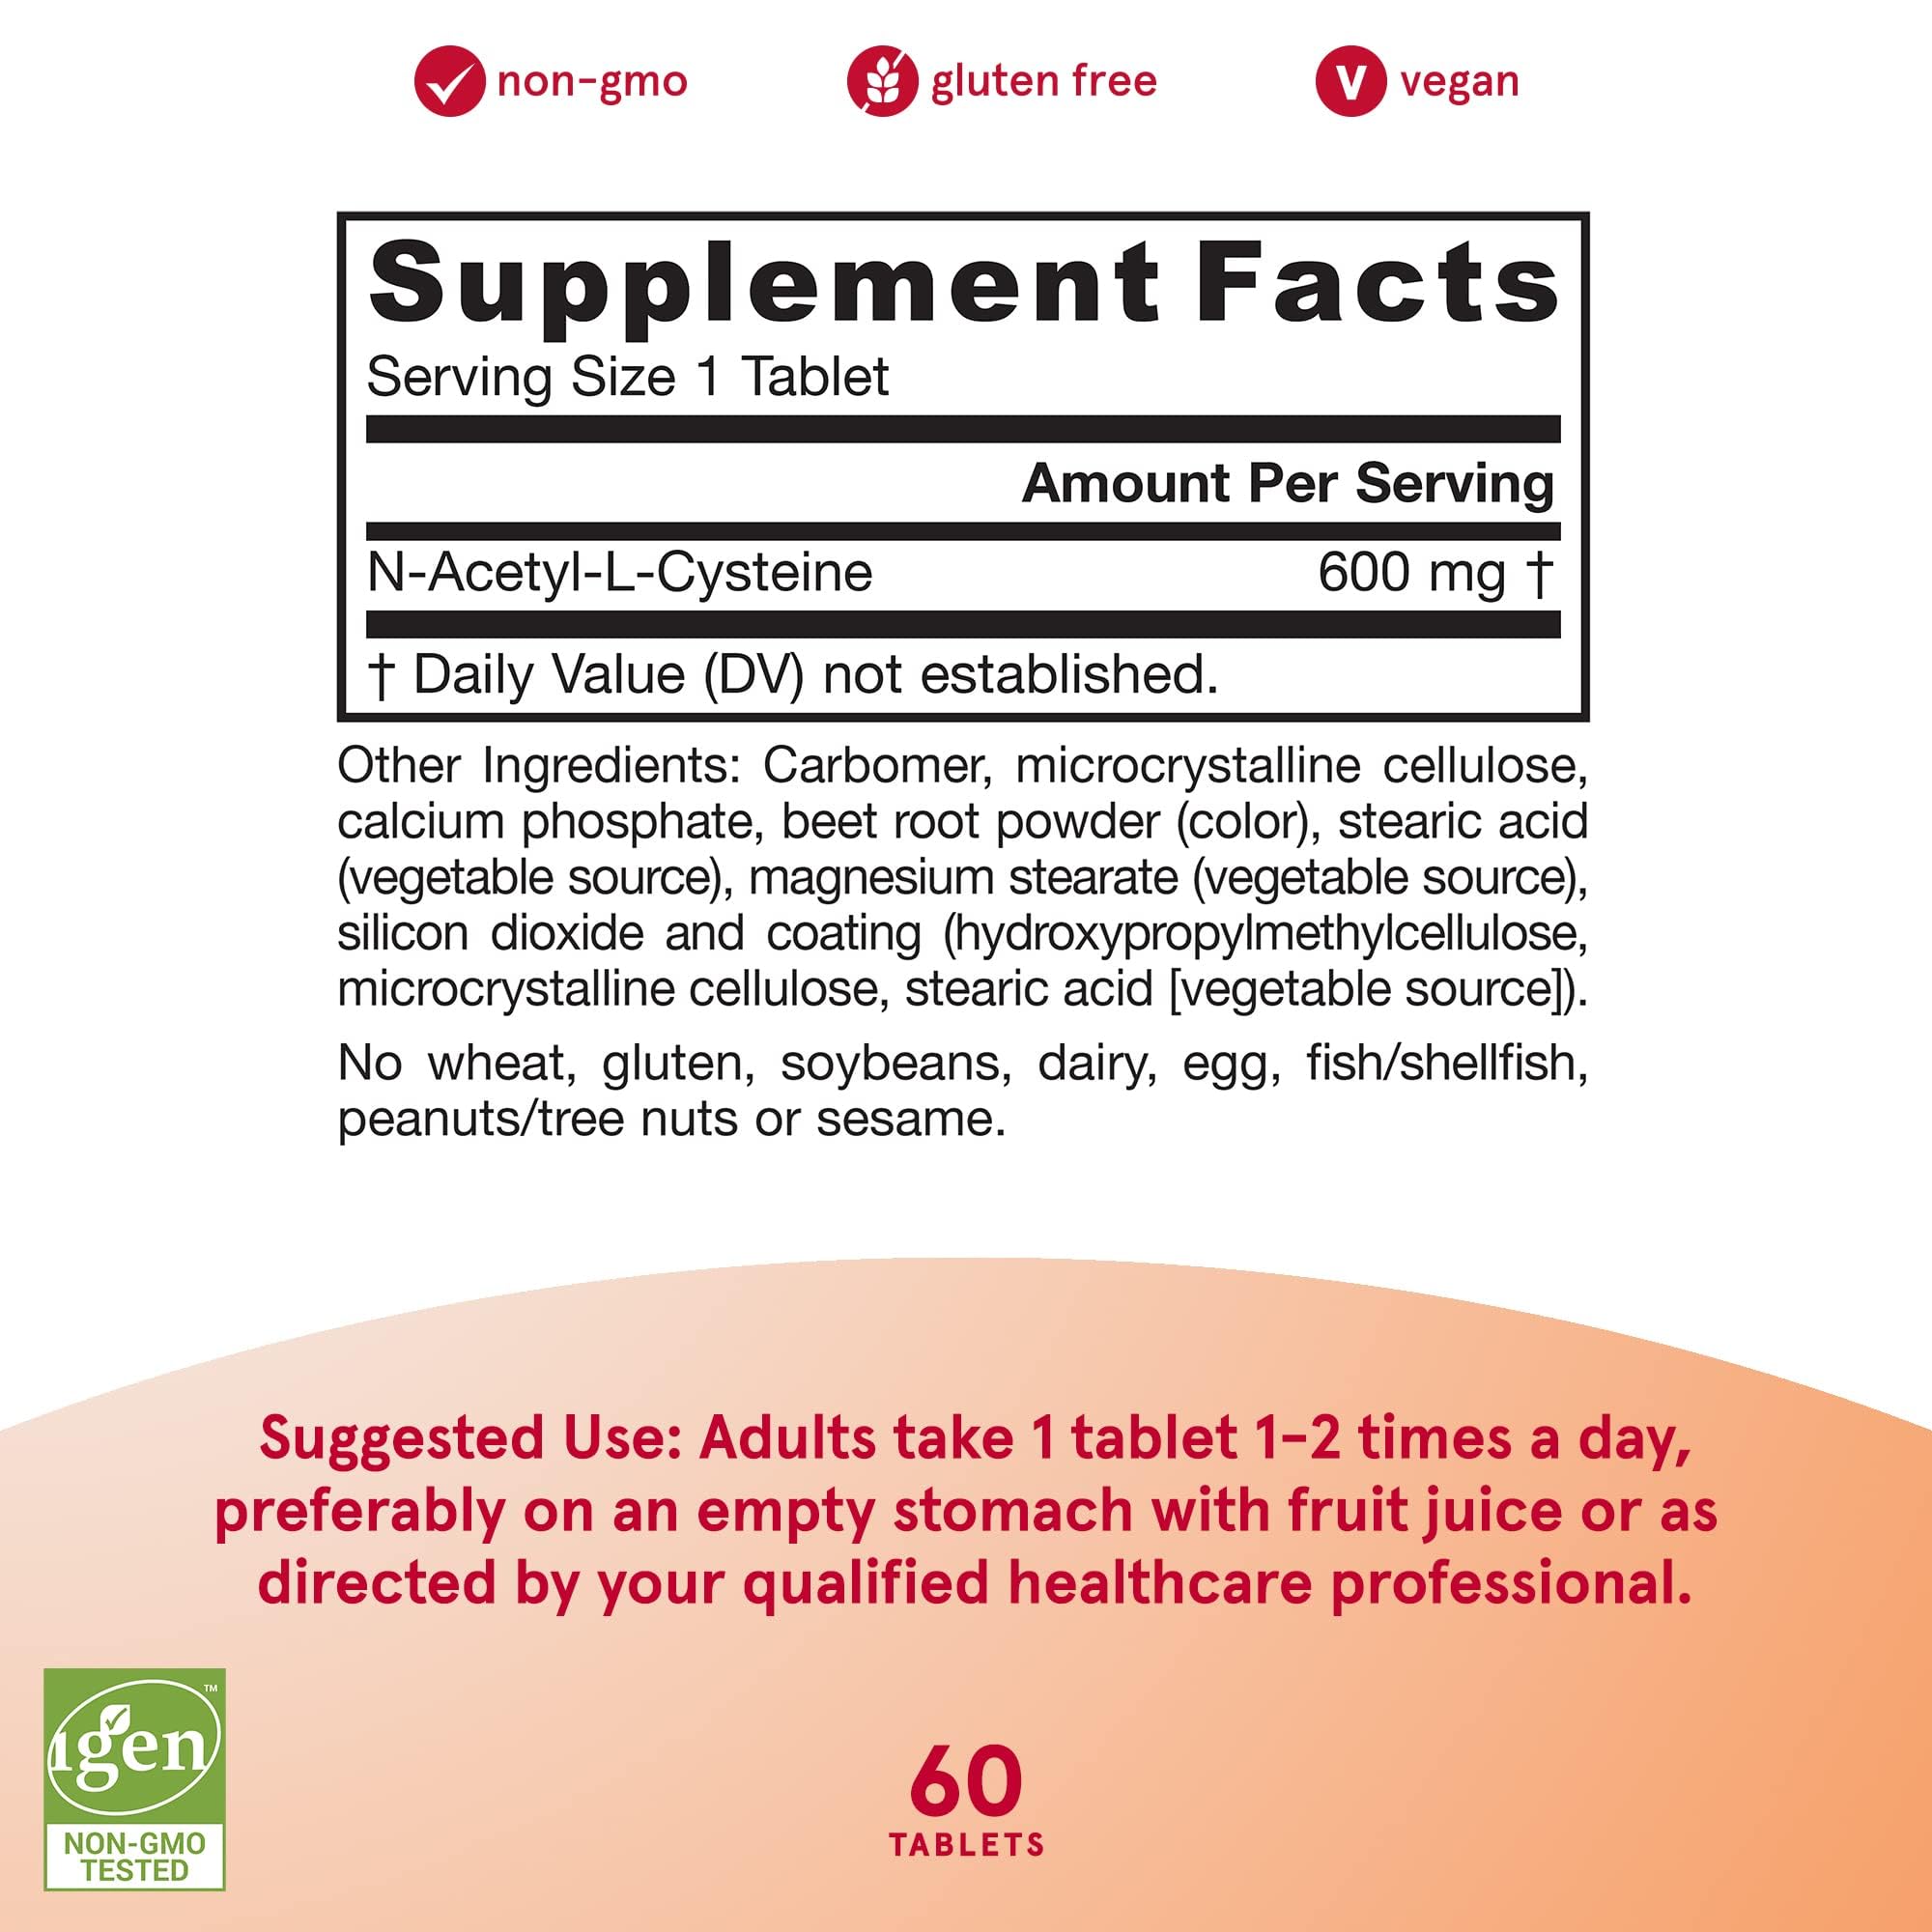 Jarrow Formulas N-A-C Sustain 600 mg - Antioxidant Amino Acid Supplement - 60 Sustain Tablets - Supports Liver & Lung Function - Precursor to Glutathione - 60 Servings (PACKAGING MAY VARY)